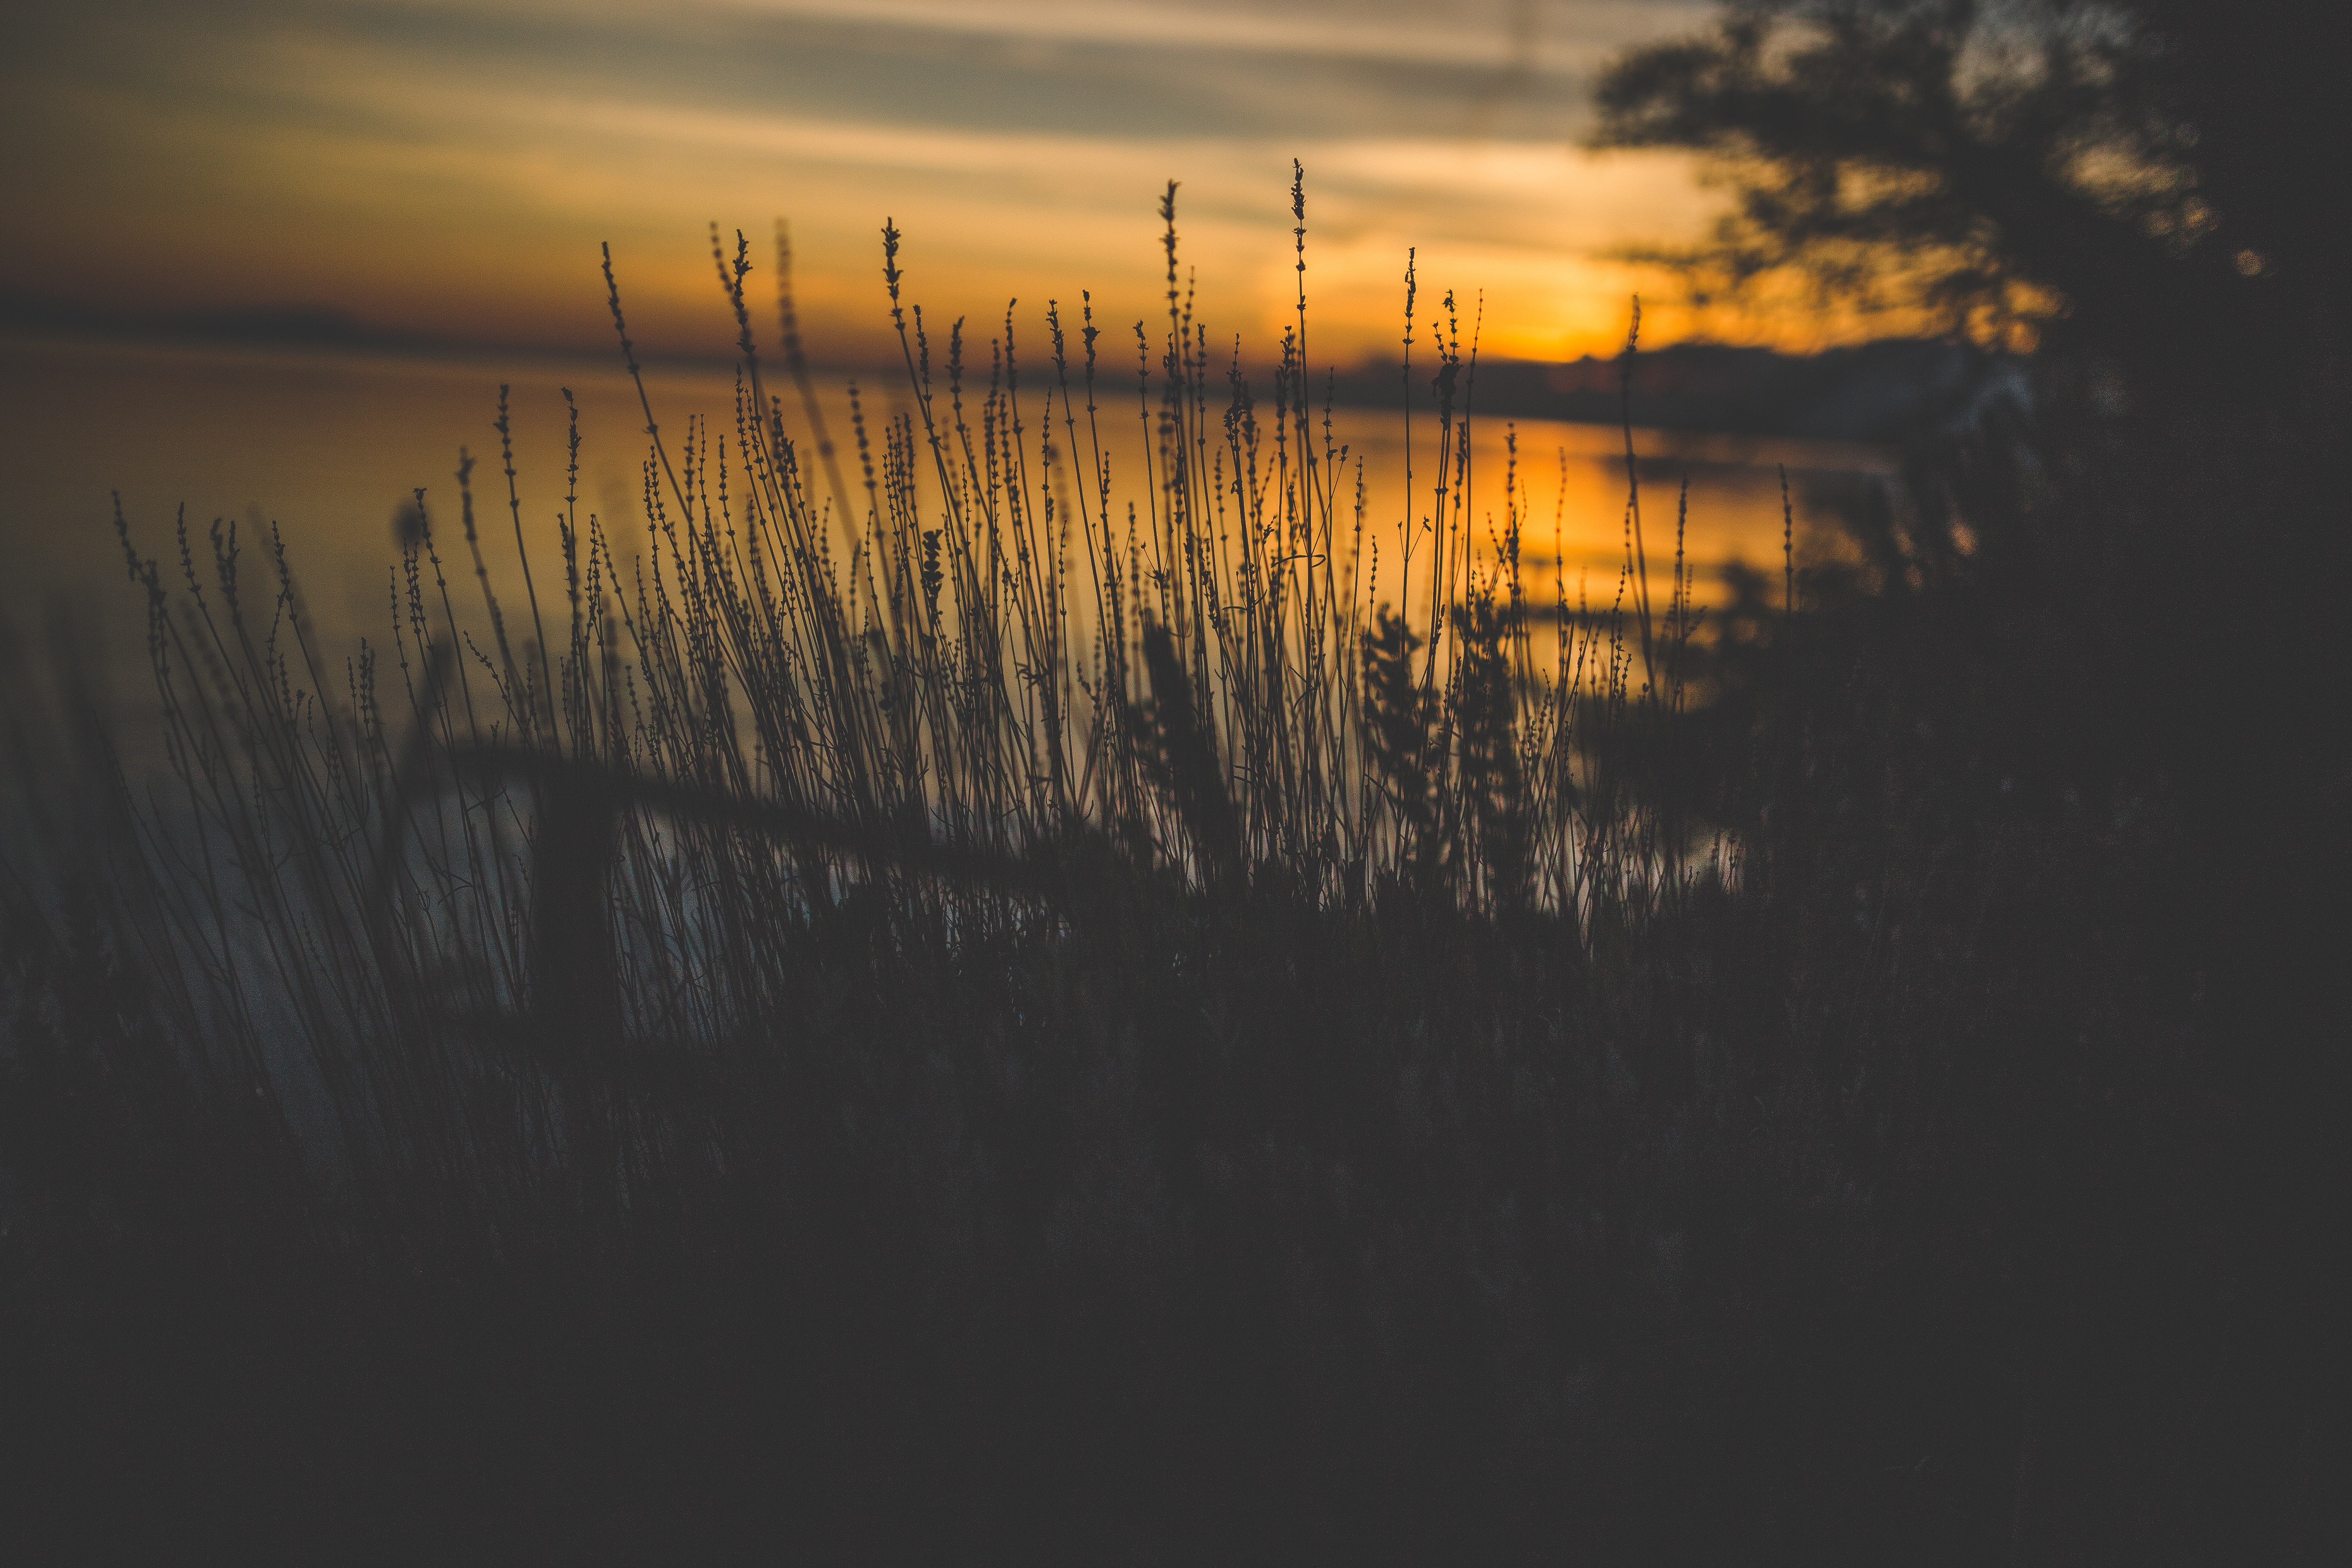 Silhouette of grass near body of water during golden hour photo